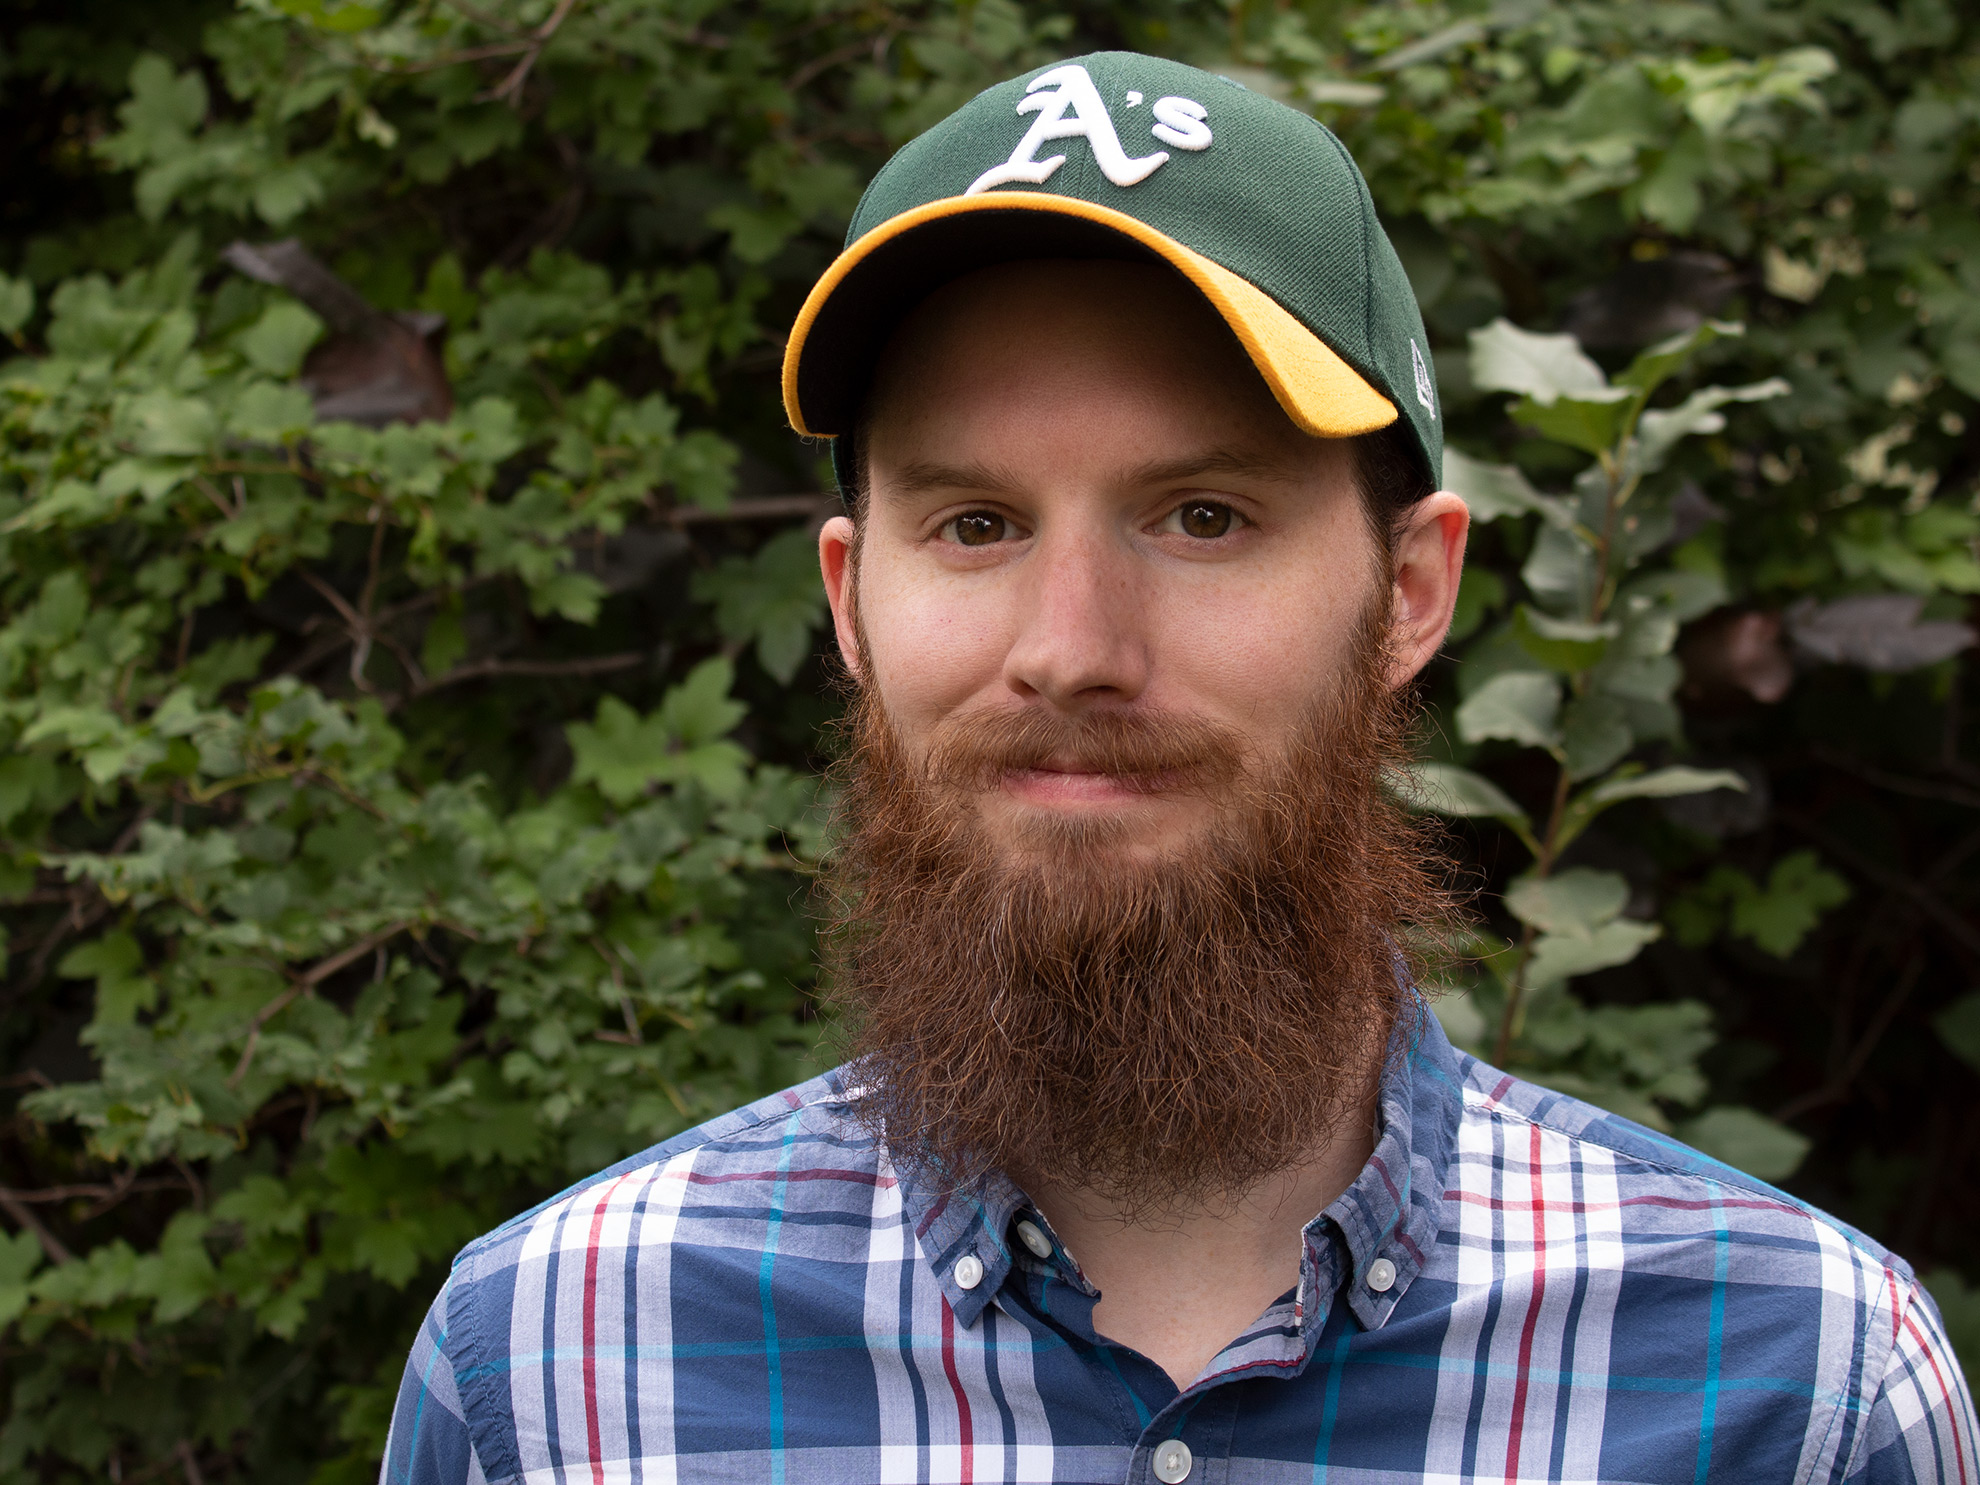 Ron Stauffer with a large beard, smiling at the camera and wearing an Oakland Athletic's ballcap standing in front of a bush.